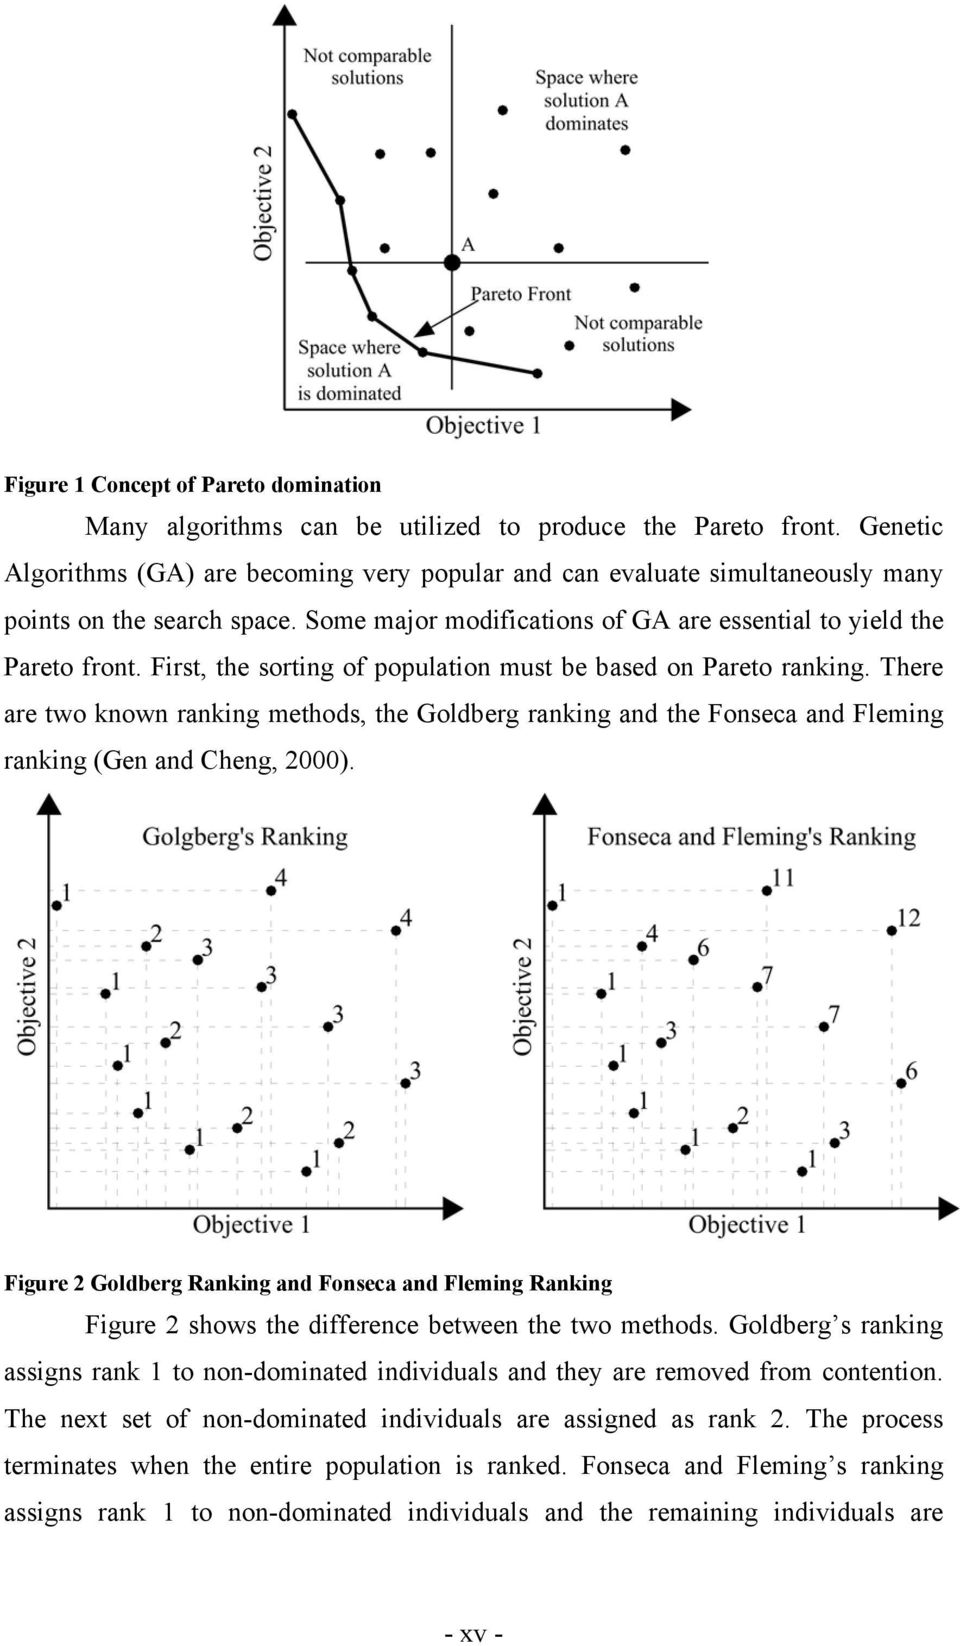 First, the sorting of population must be based on Pareto ranking. There are two known ranking methods, the Goldberg ranking and the Fonseca and Fleming ranking (Gen and Cheng, 2000).